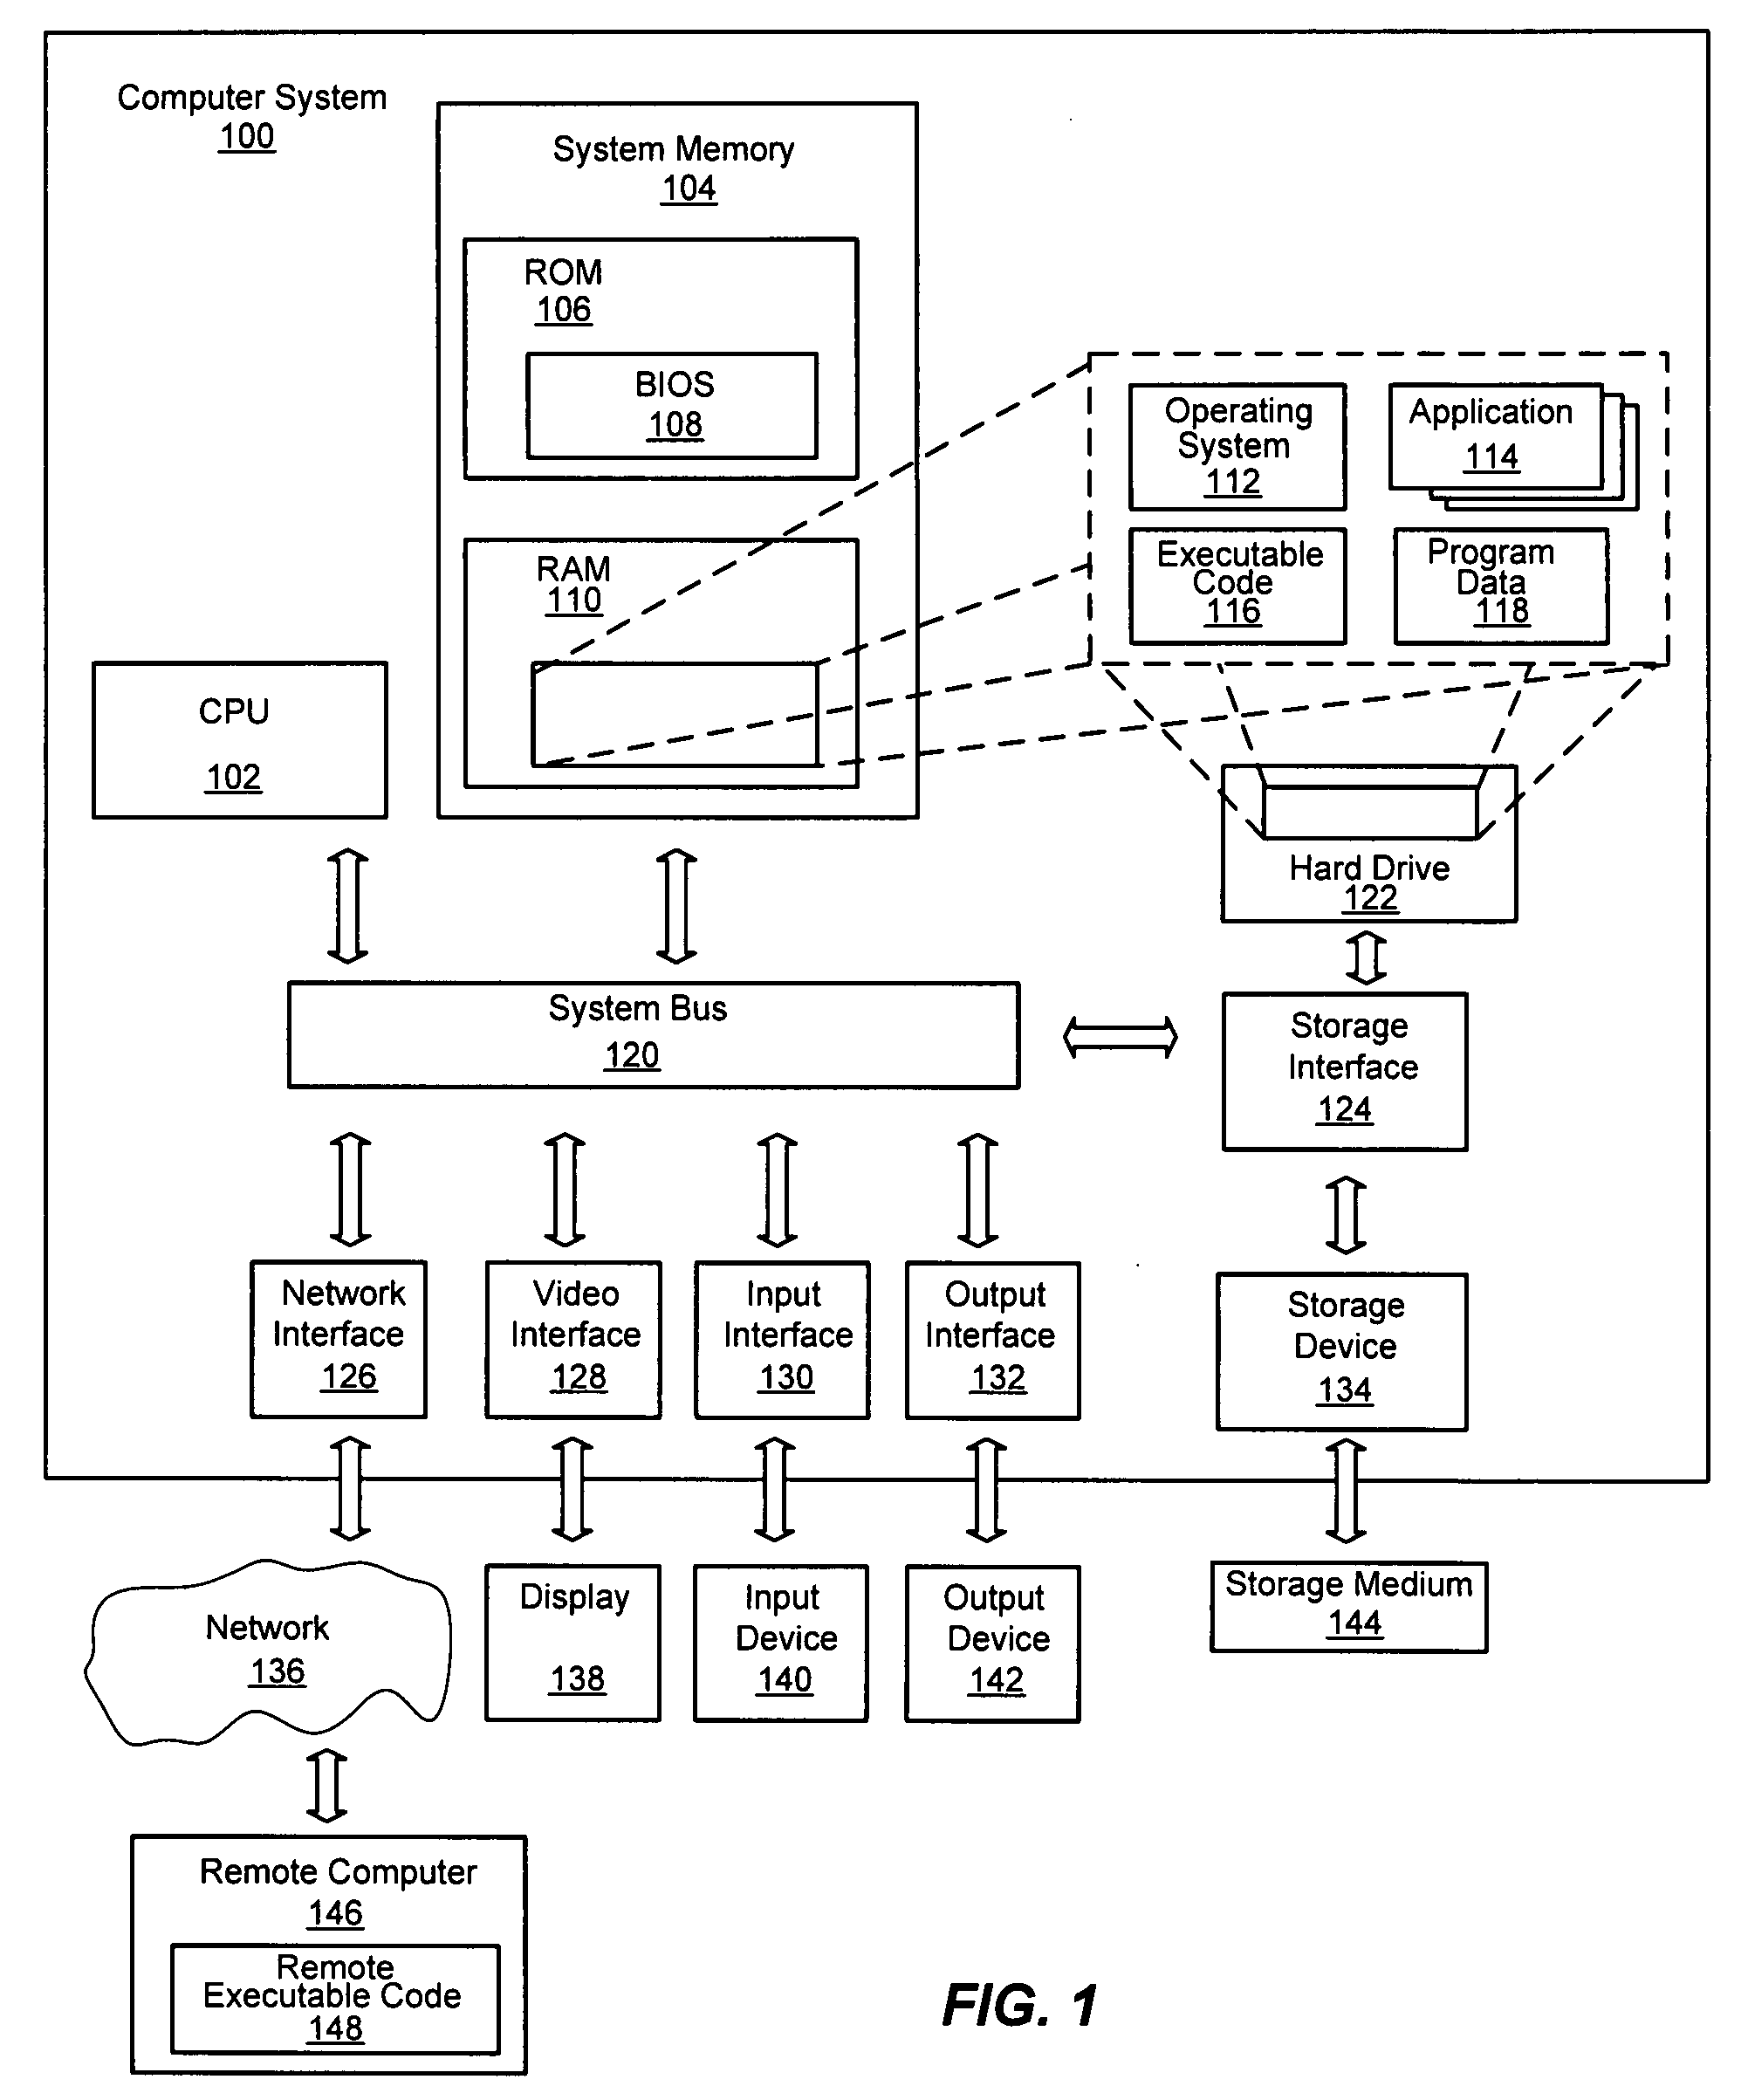 System and method of restoring data and context of client applications stored on the web